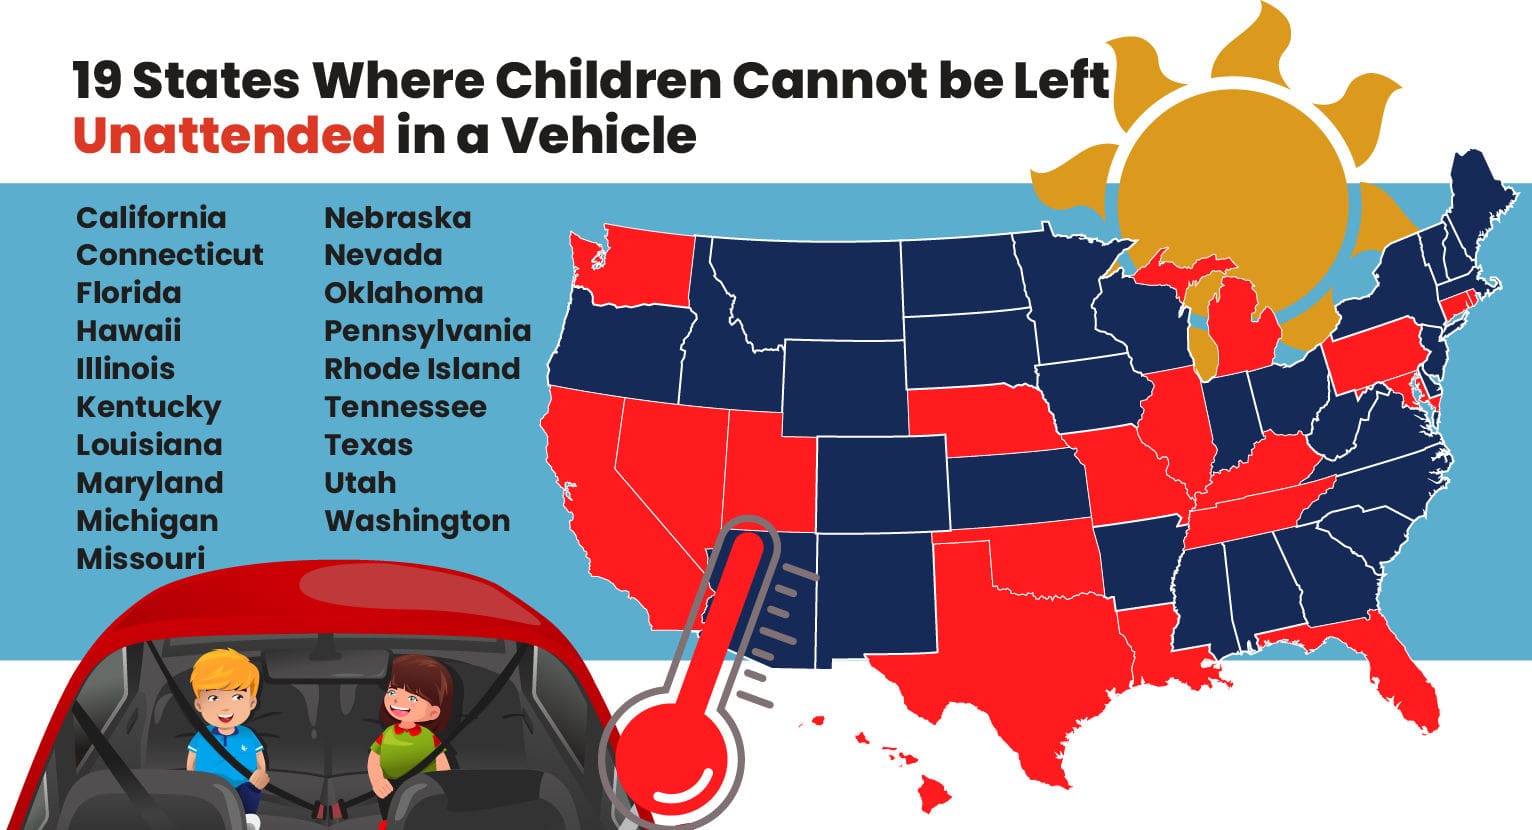 19 States Where Children Cannot be Left in Vehicles